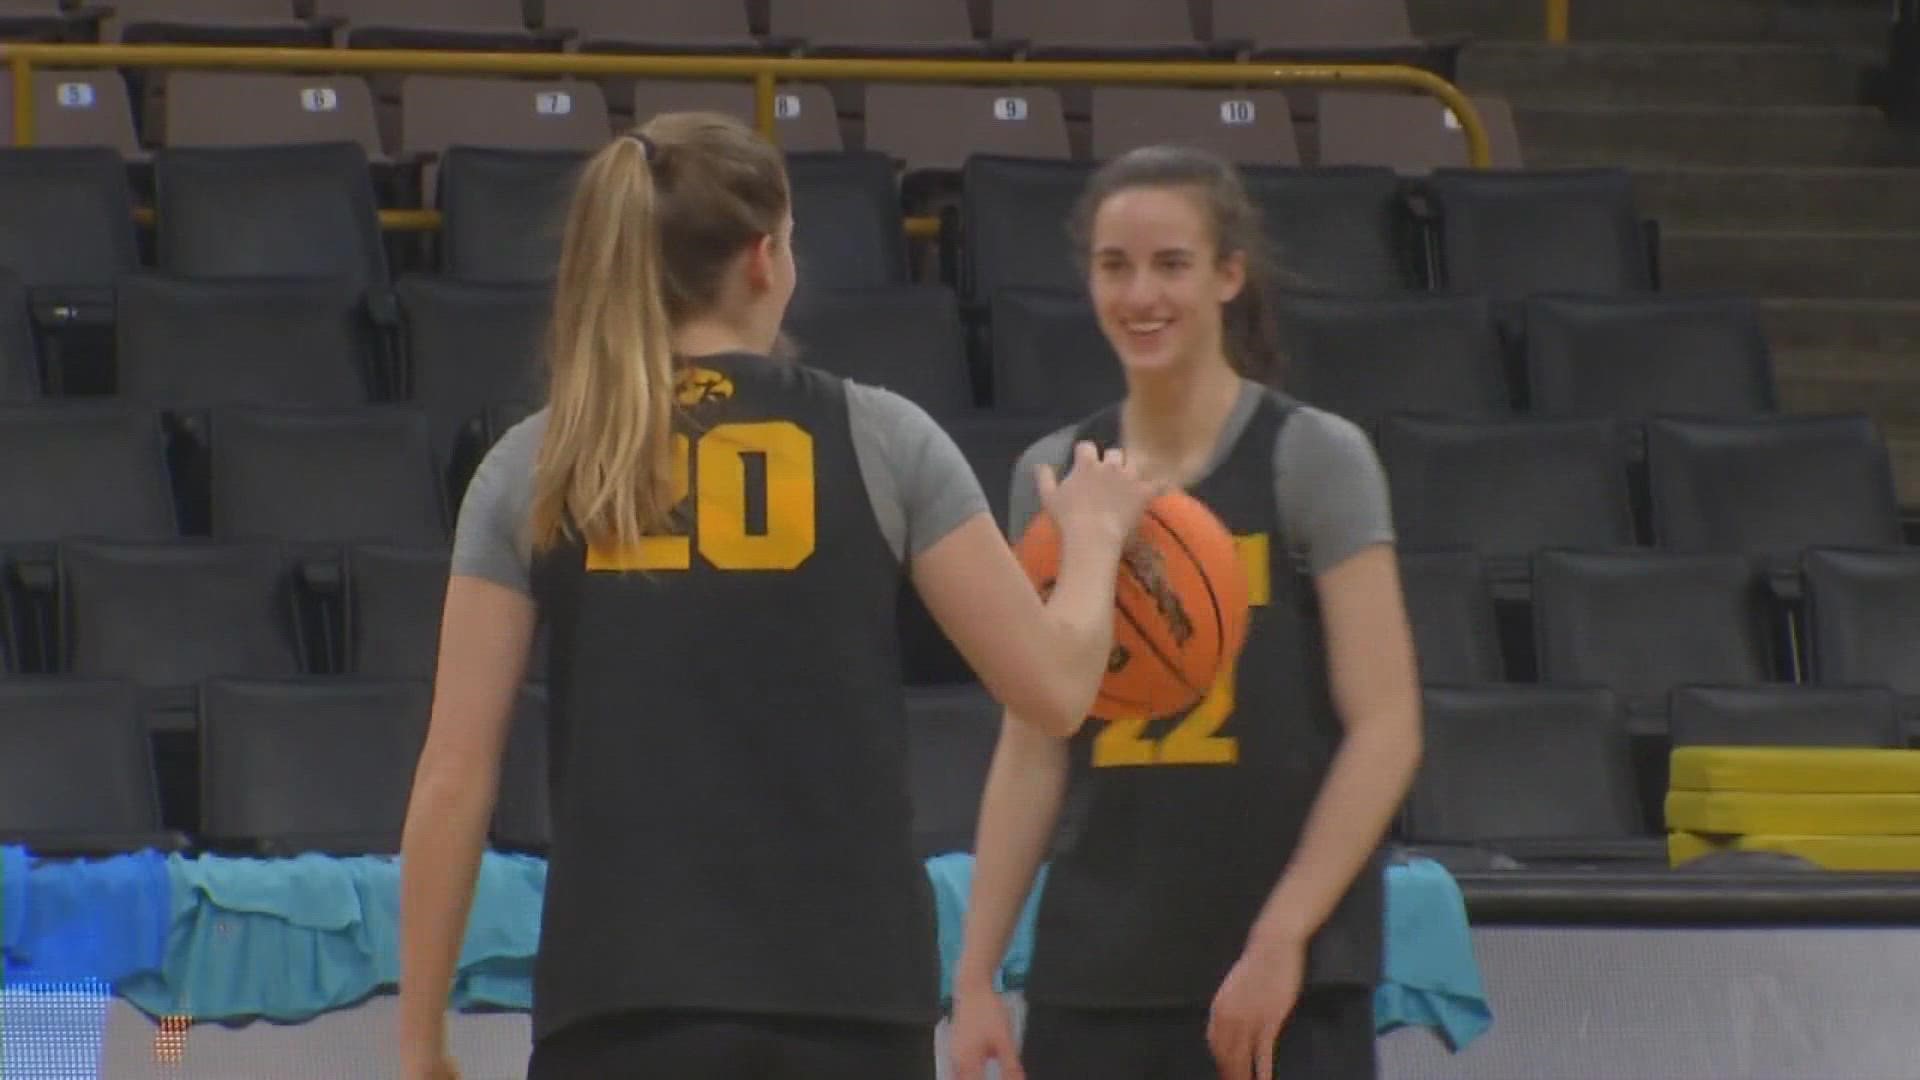 Iowa tips of their season with a double header at Carver Hawkeye Arena on Nov. 7.